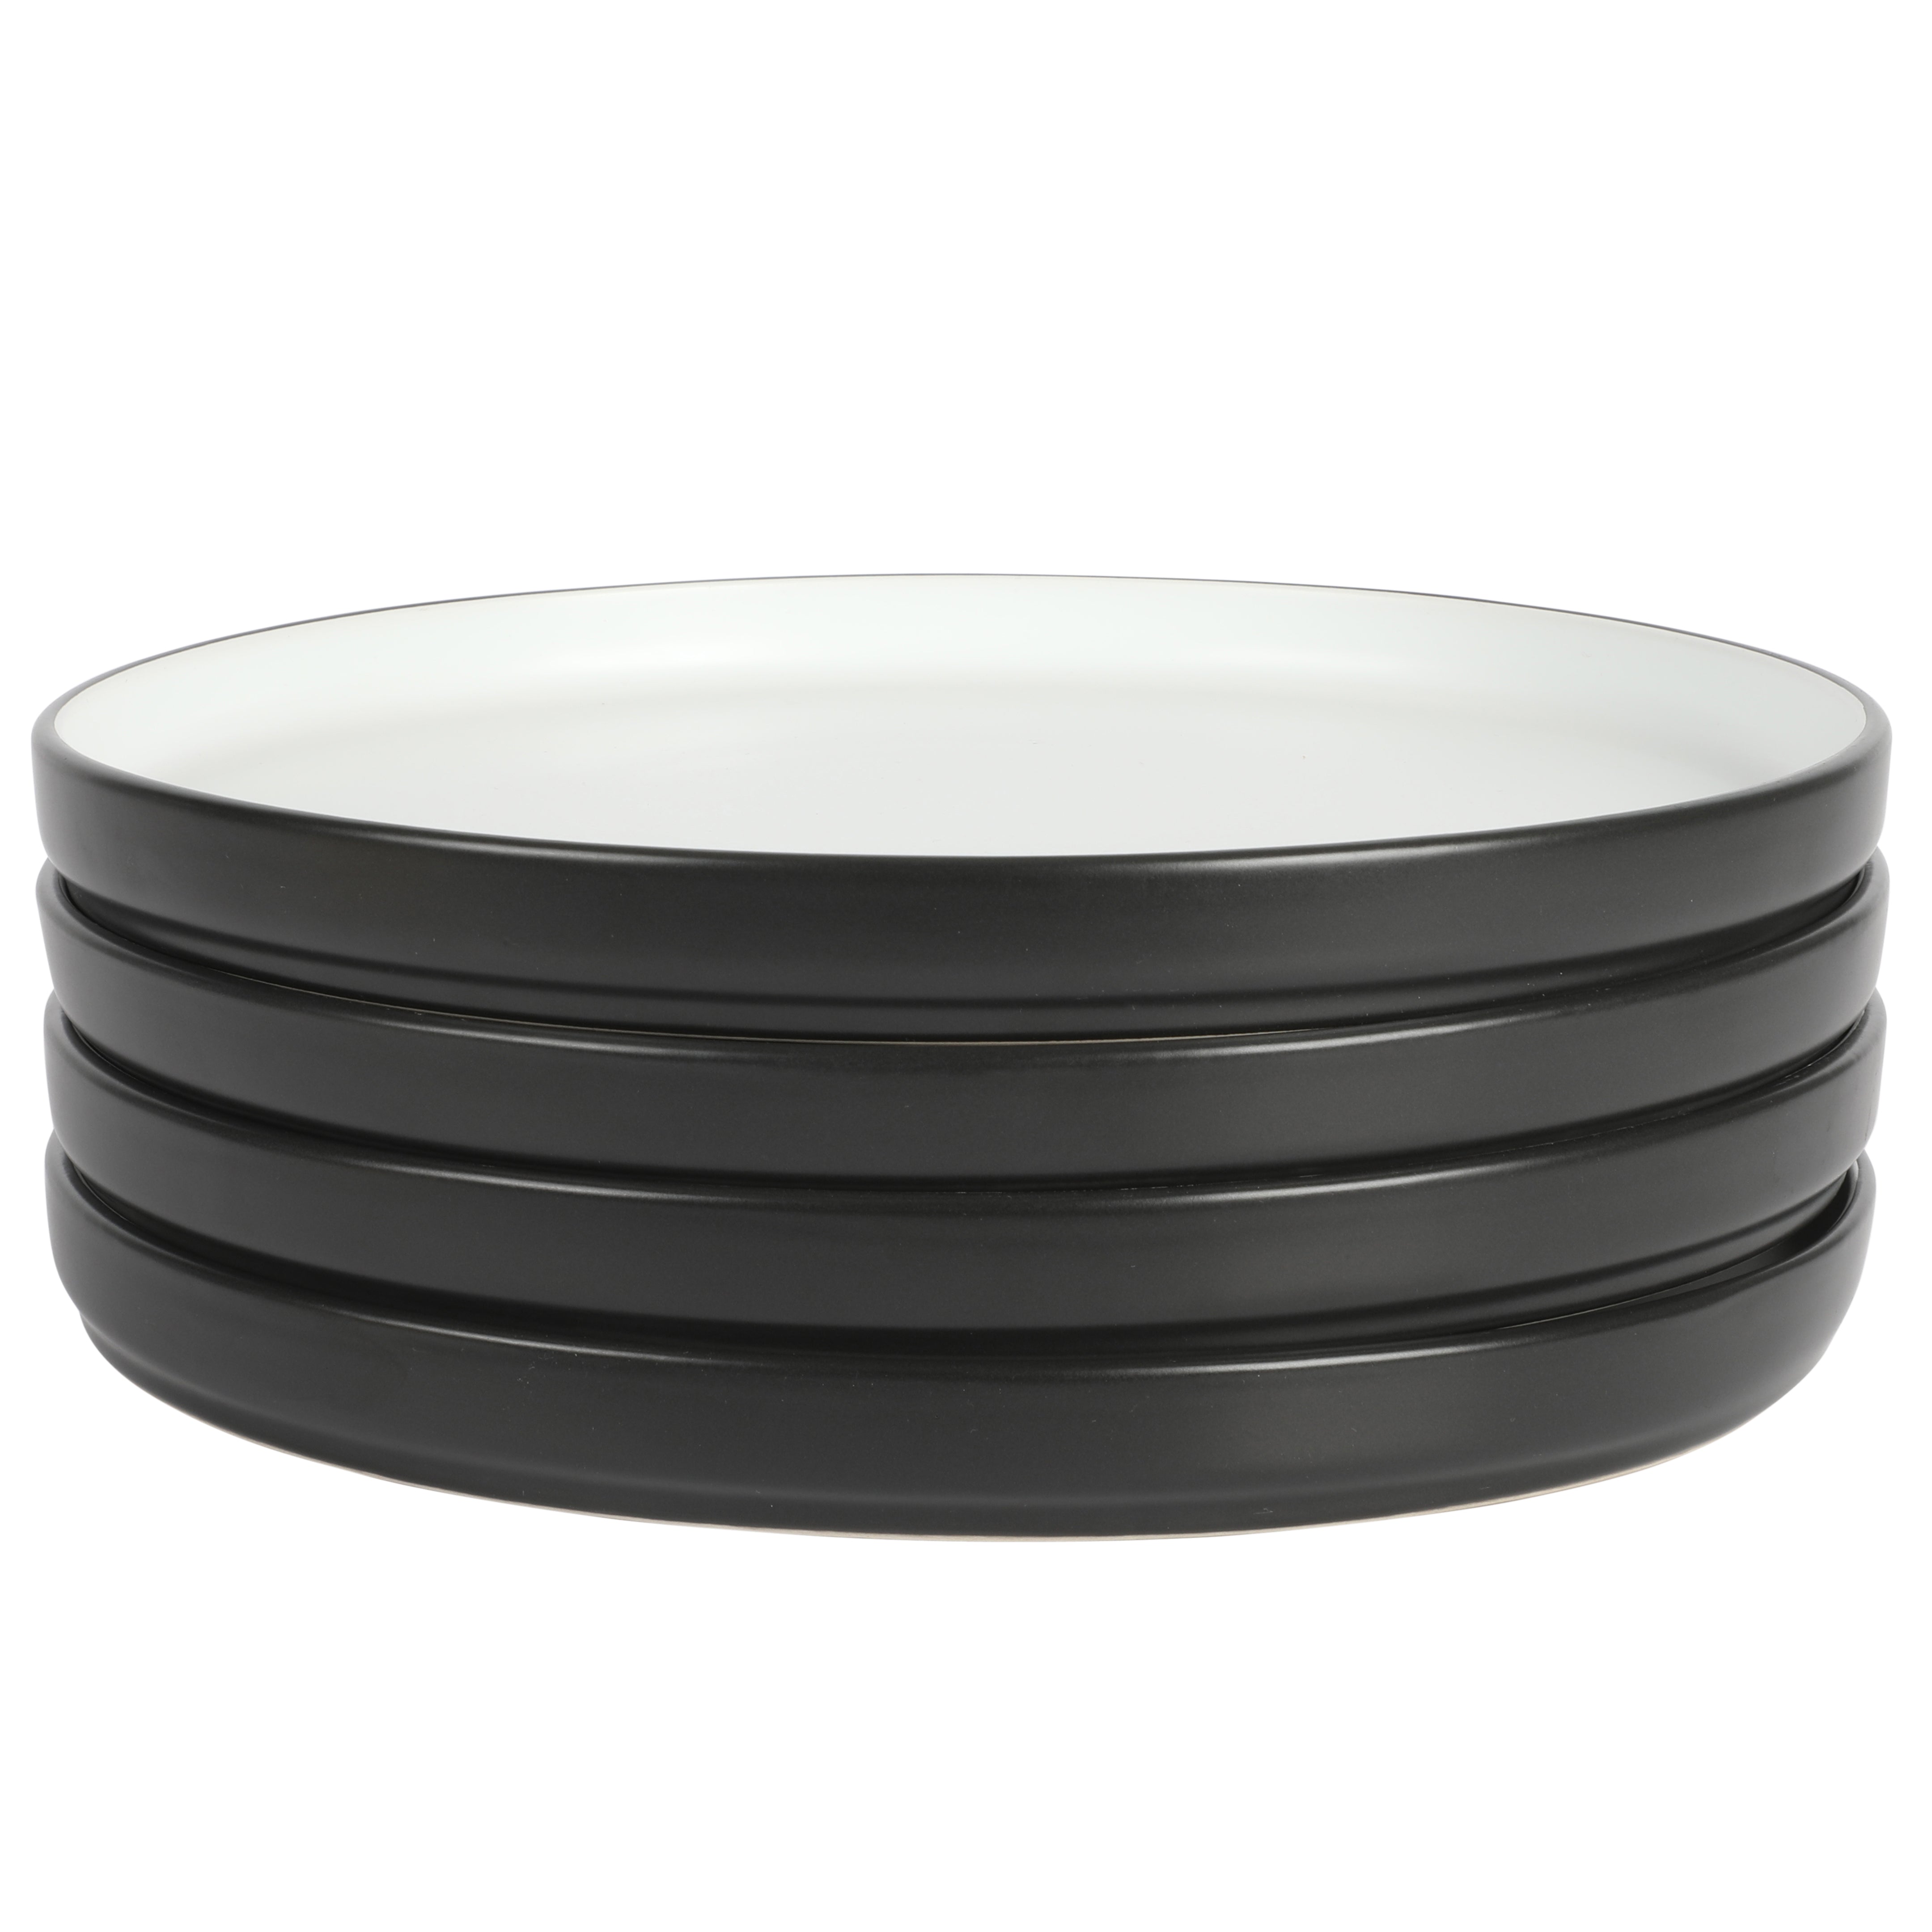 Babish 4 Pack 10.5" Stoneware Stackable Dinner Plates